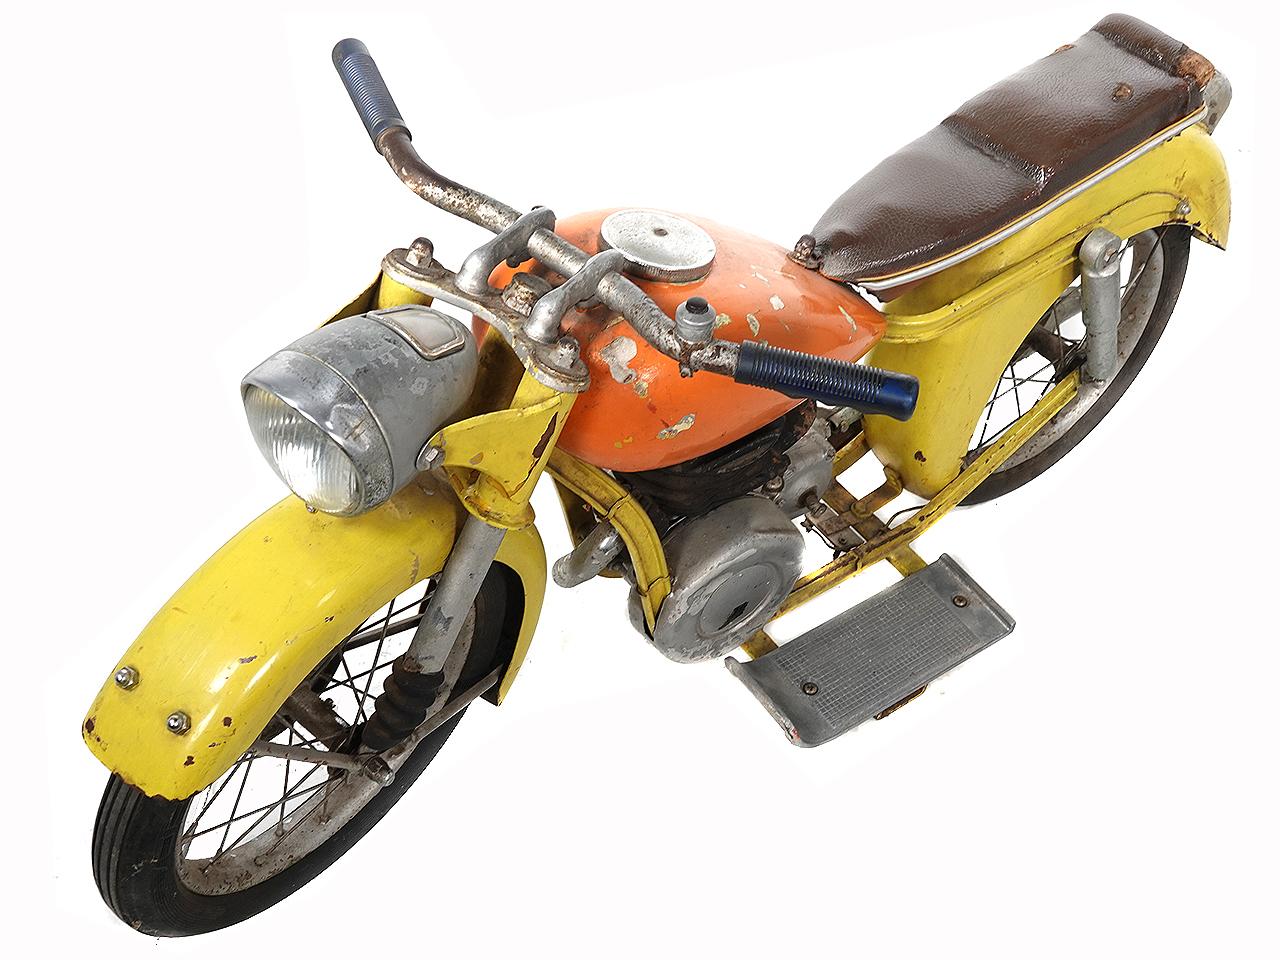 German Rare 1950s Childs Size Carousel Motorcycle For Sale